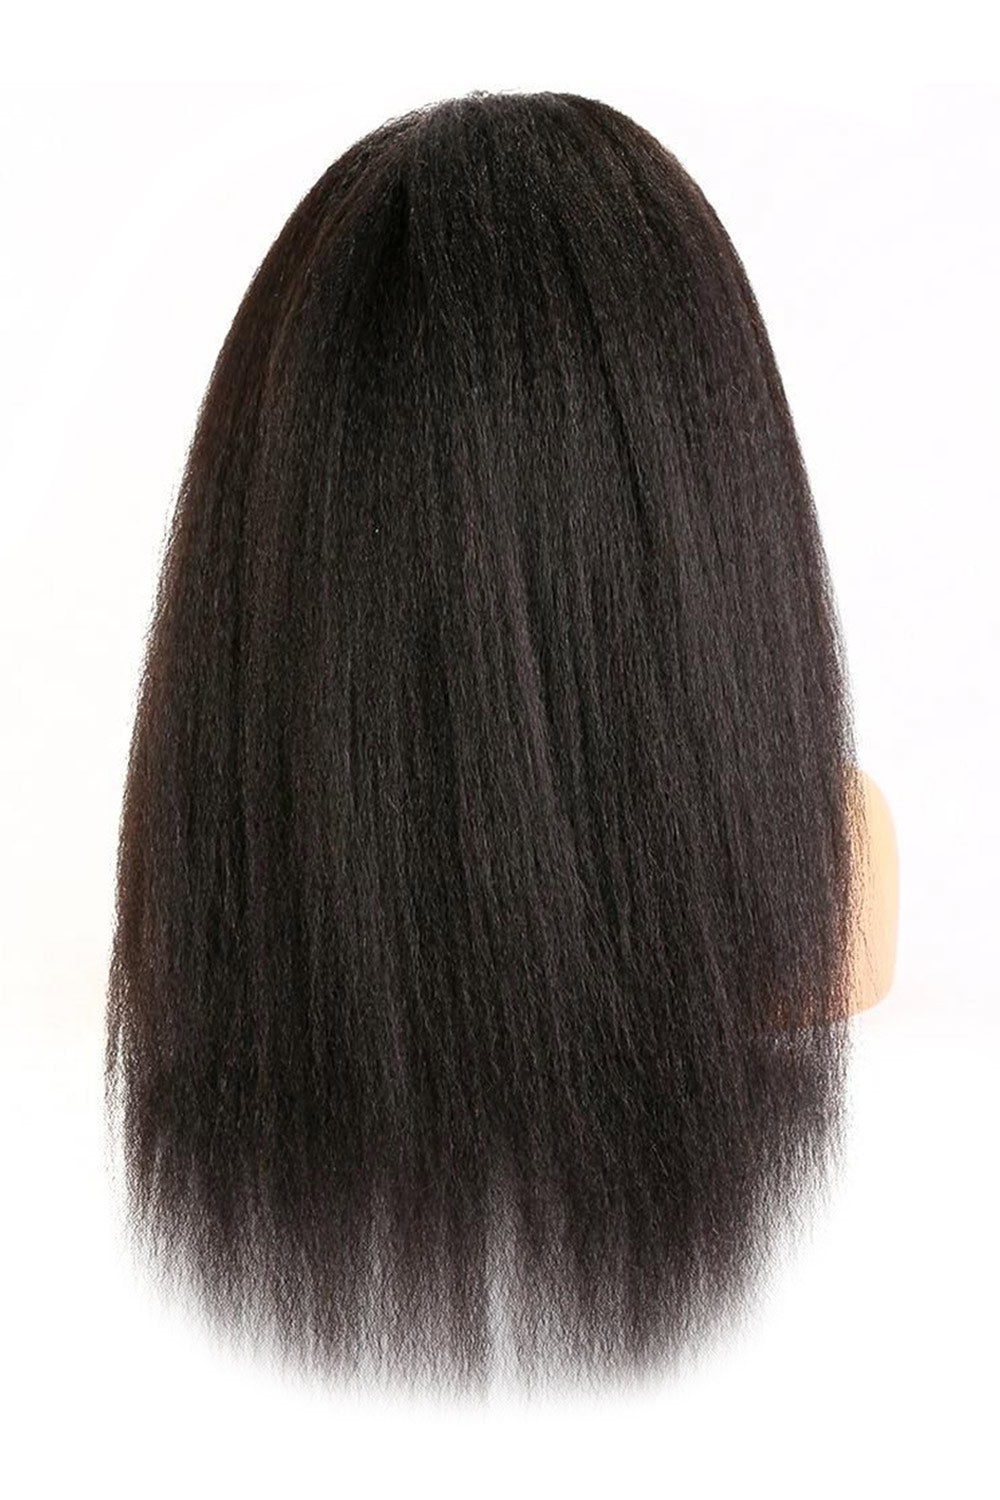 Pre Plucked 360 Hd Lace Frontal Wig Human Hair Kinky Straight Styles-8